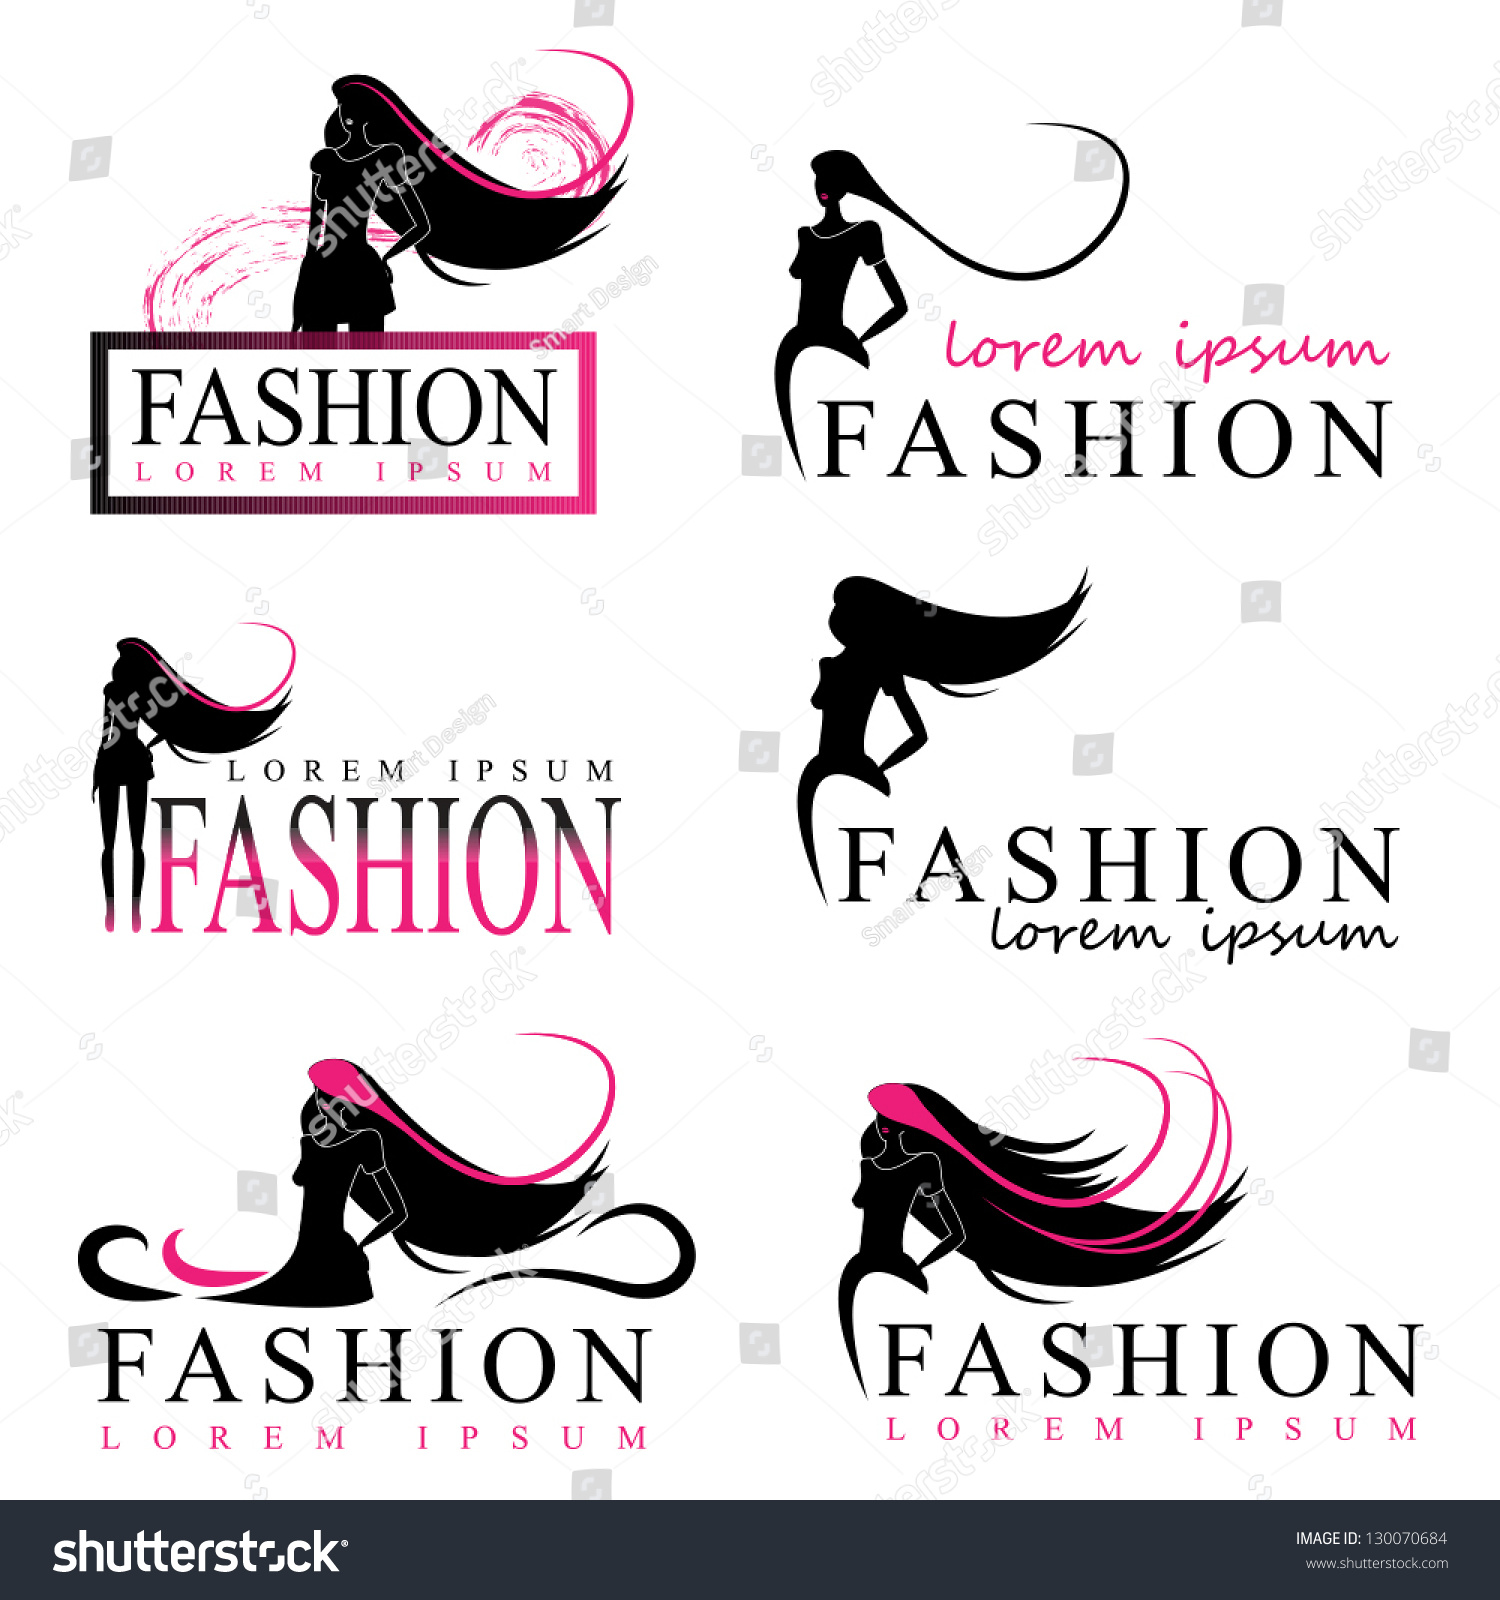 Fashion Woman Silhouette Isolated On White Background - Vector ...